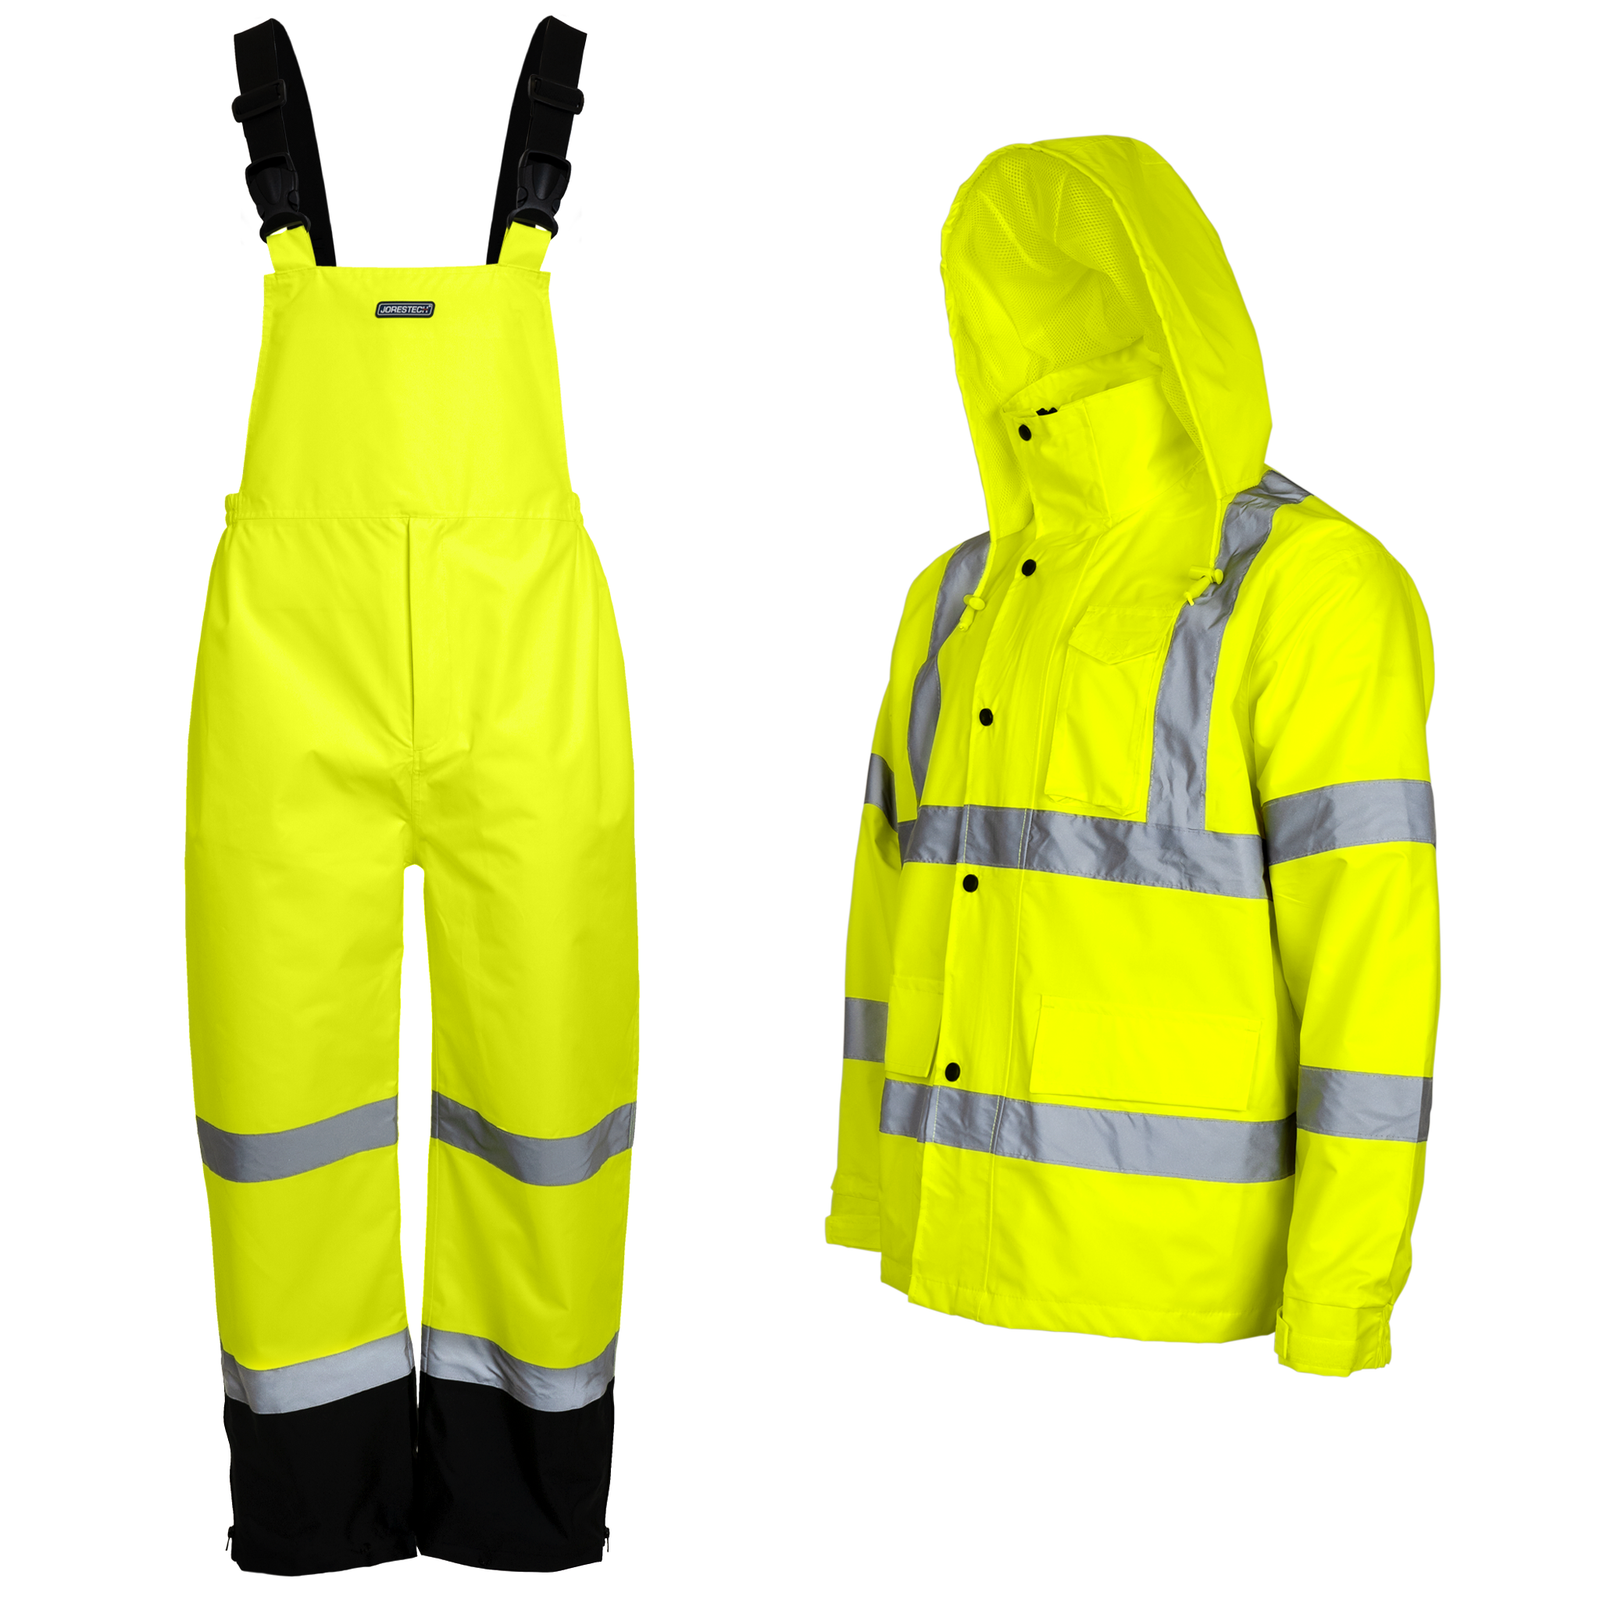 HI- visibility waterproof safety rain set overall pants with adjustable shoulder straps and jacket with reflective strips